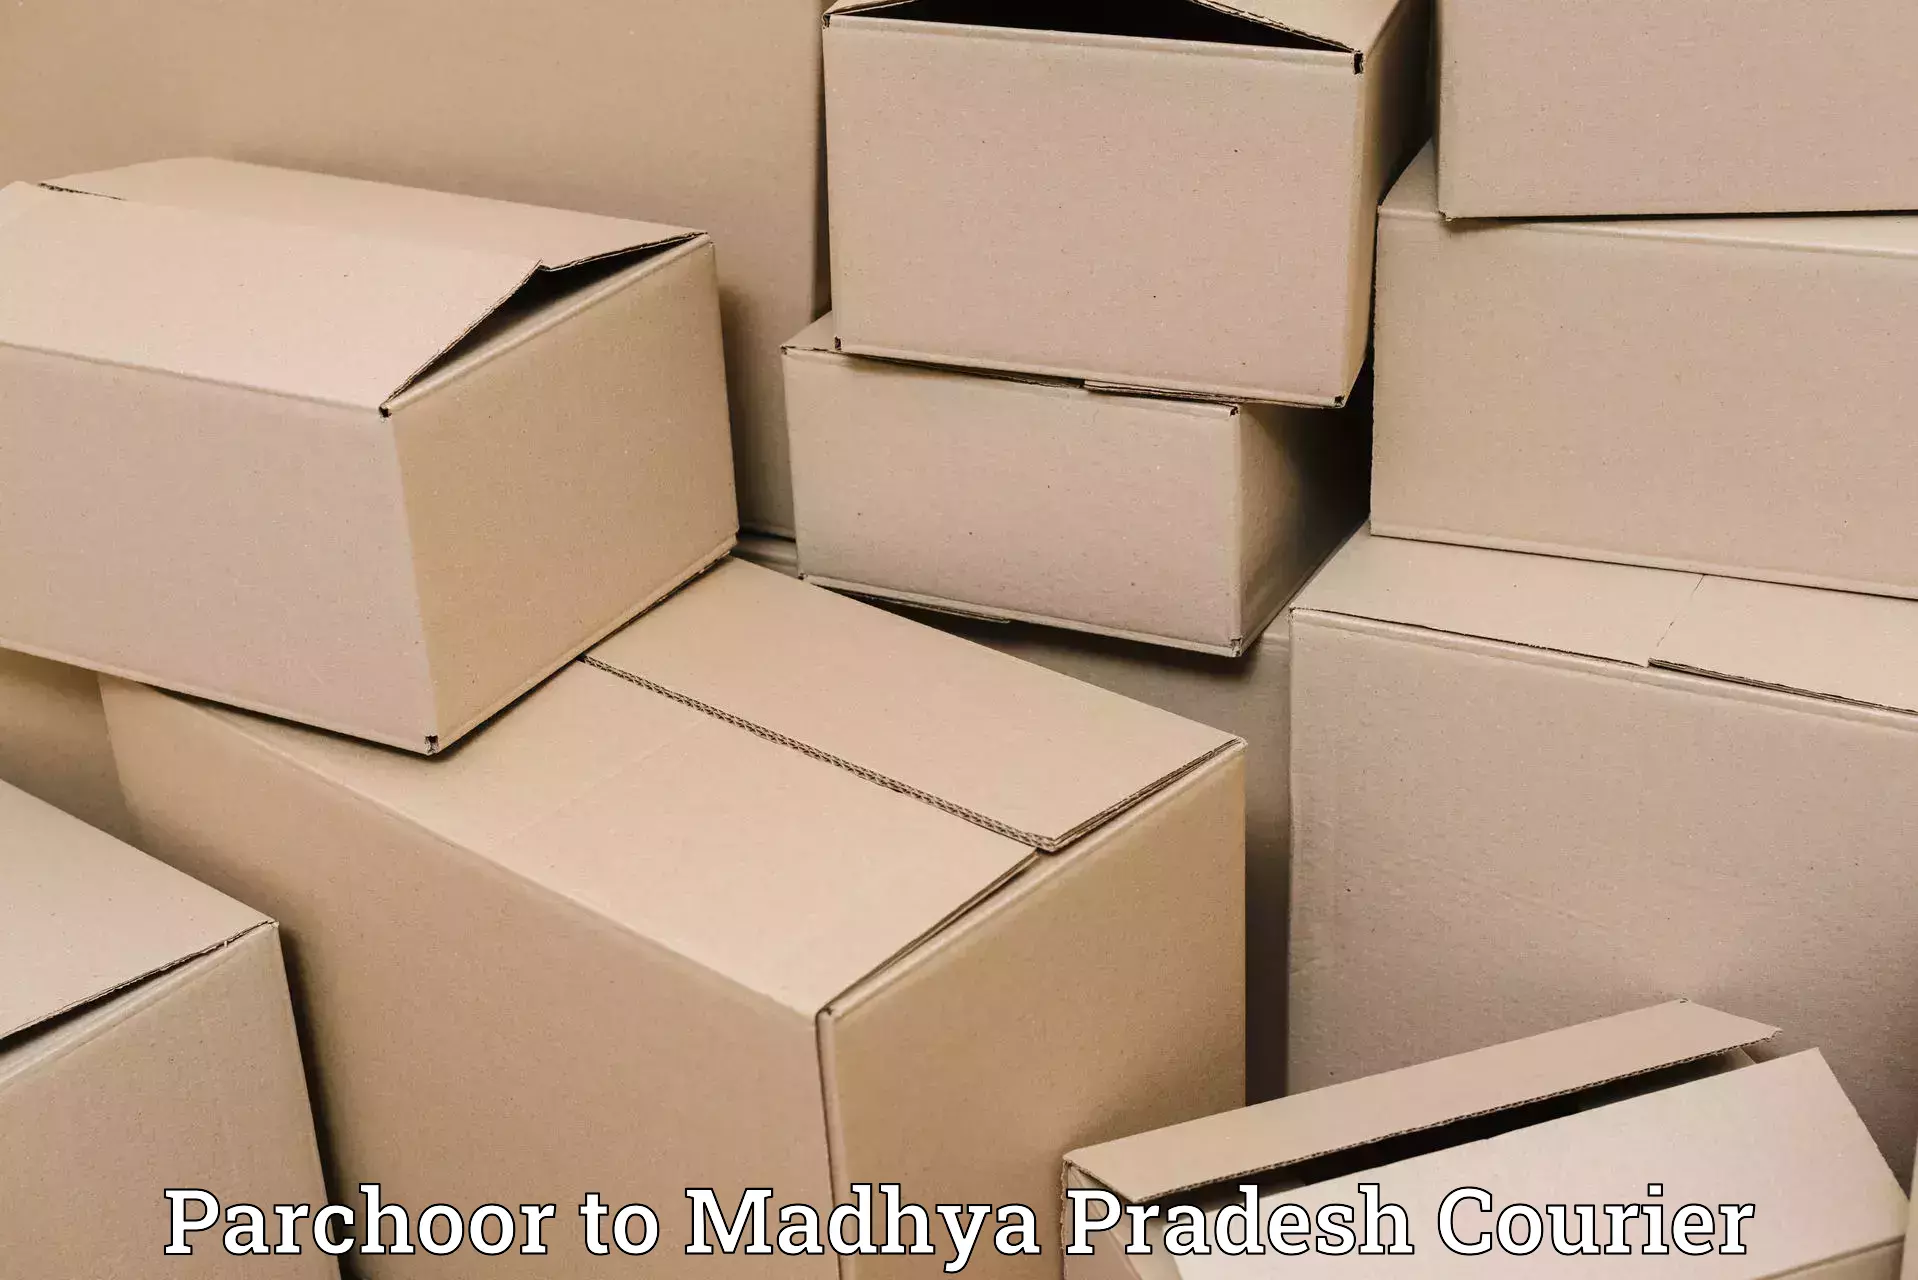 International courier networks Parchoor to Bhopal